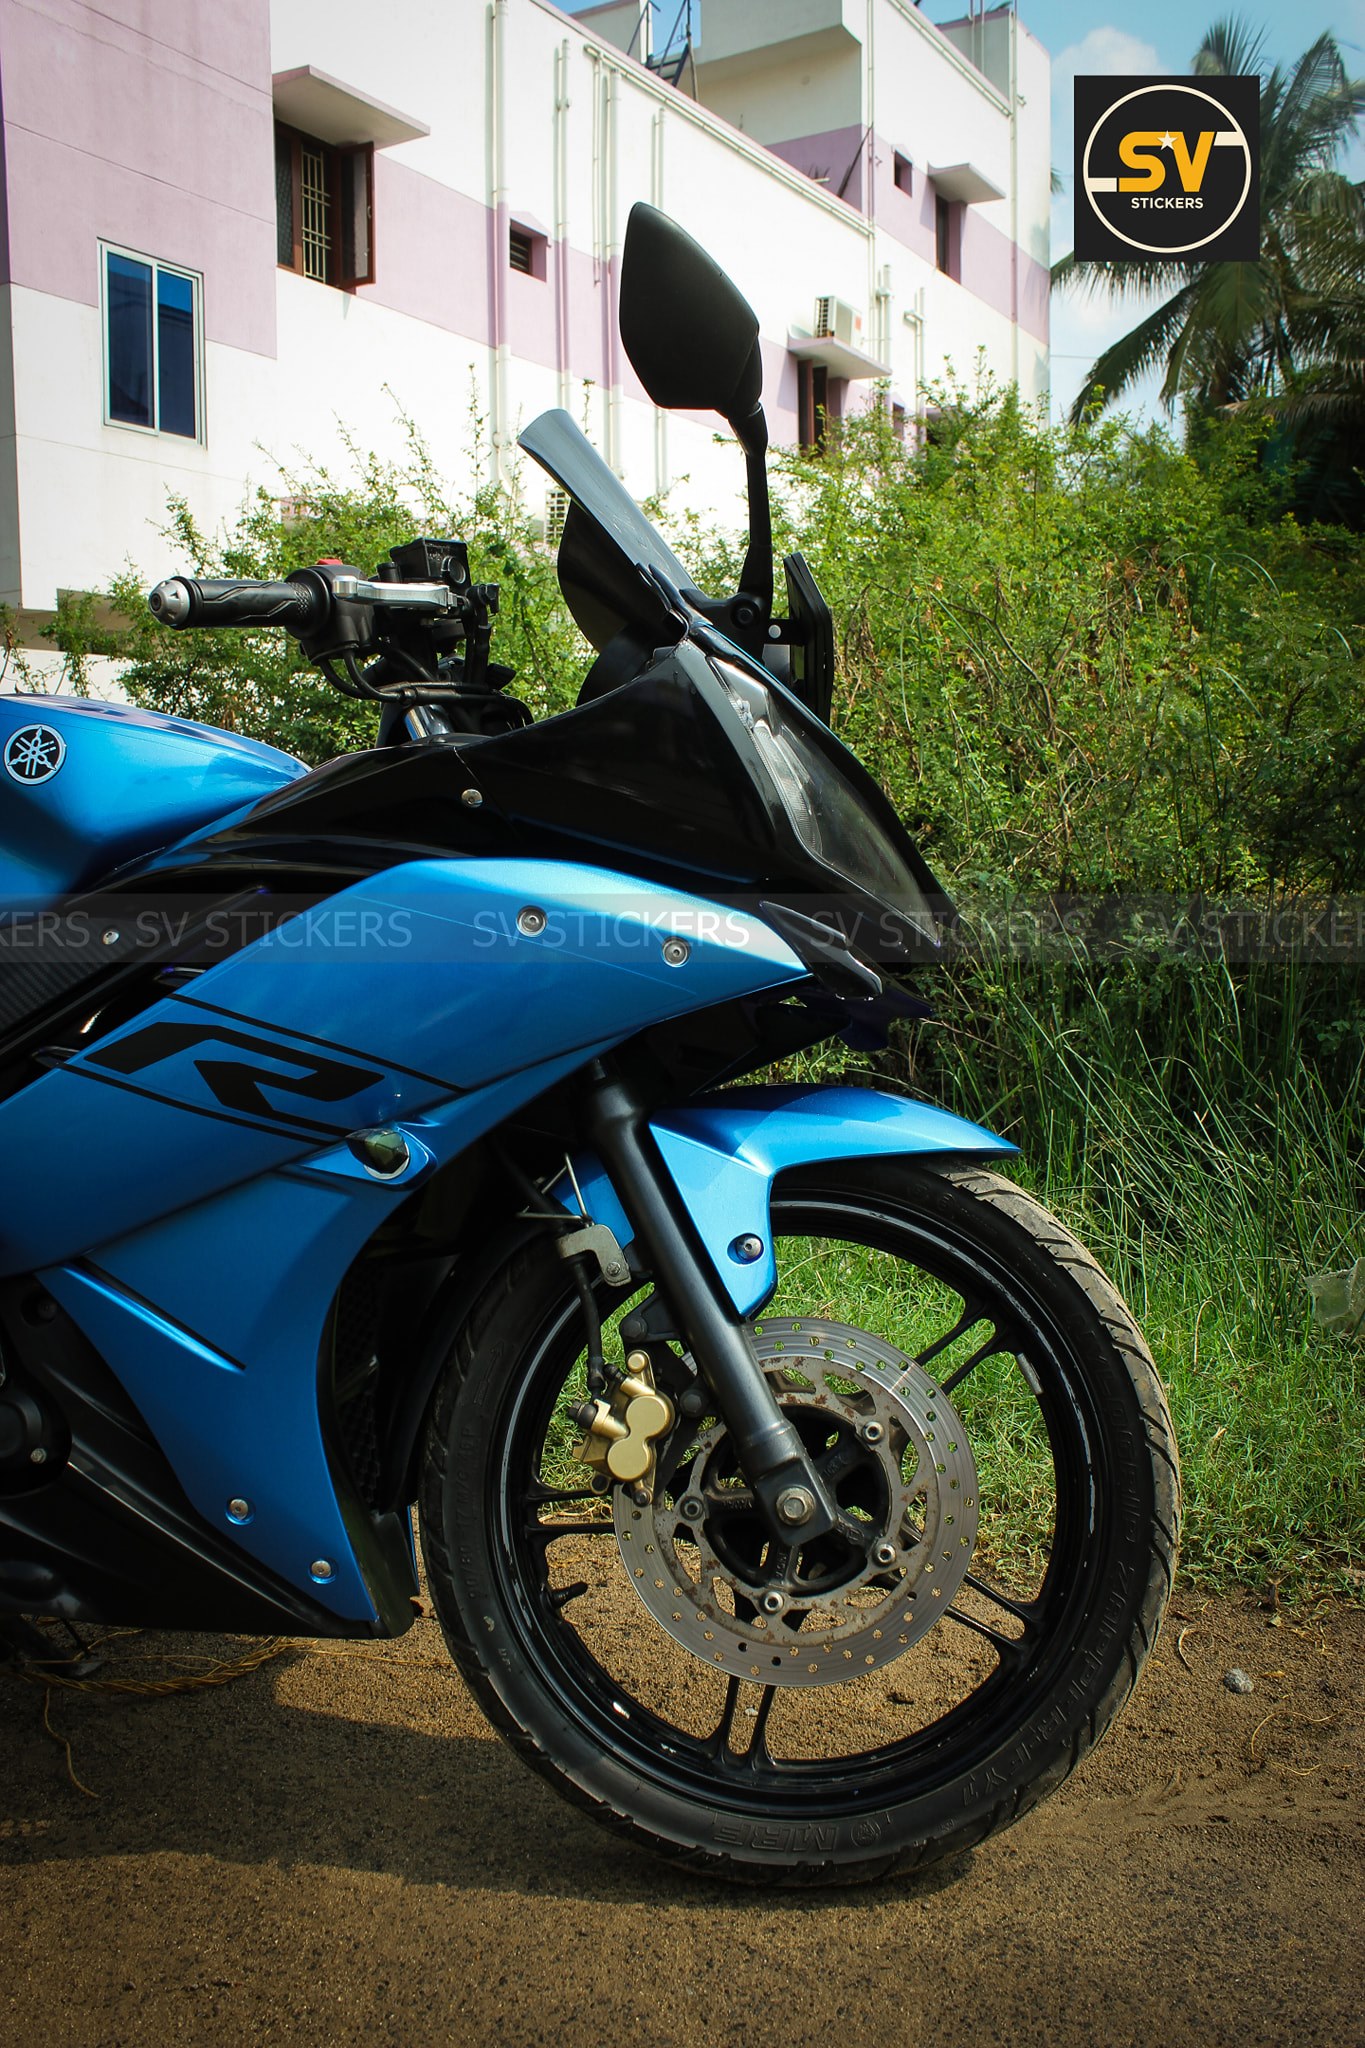 Meet Bright Blue Yamaha R15 Version 2.0 by SV Stickers - angle